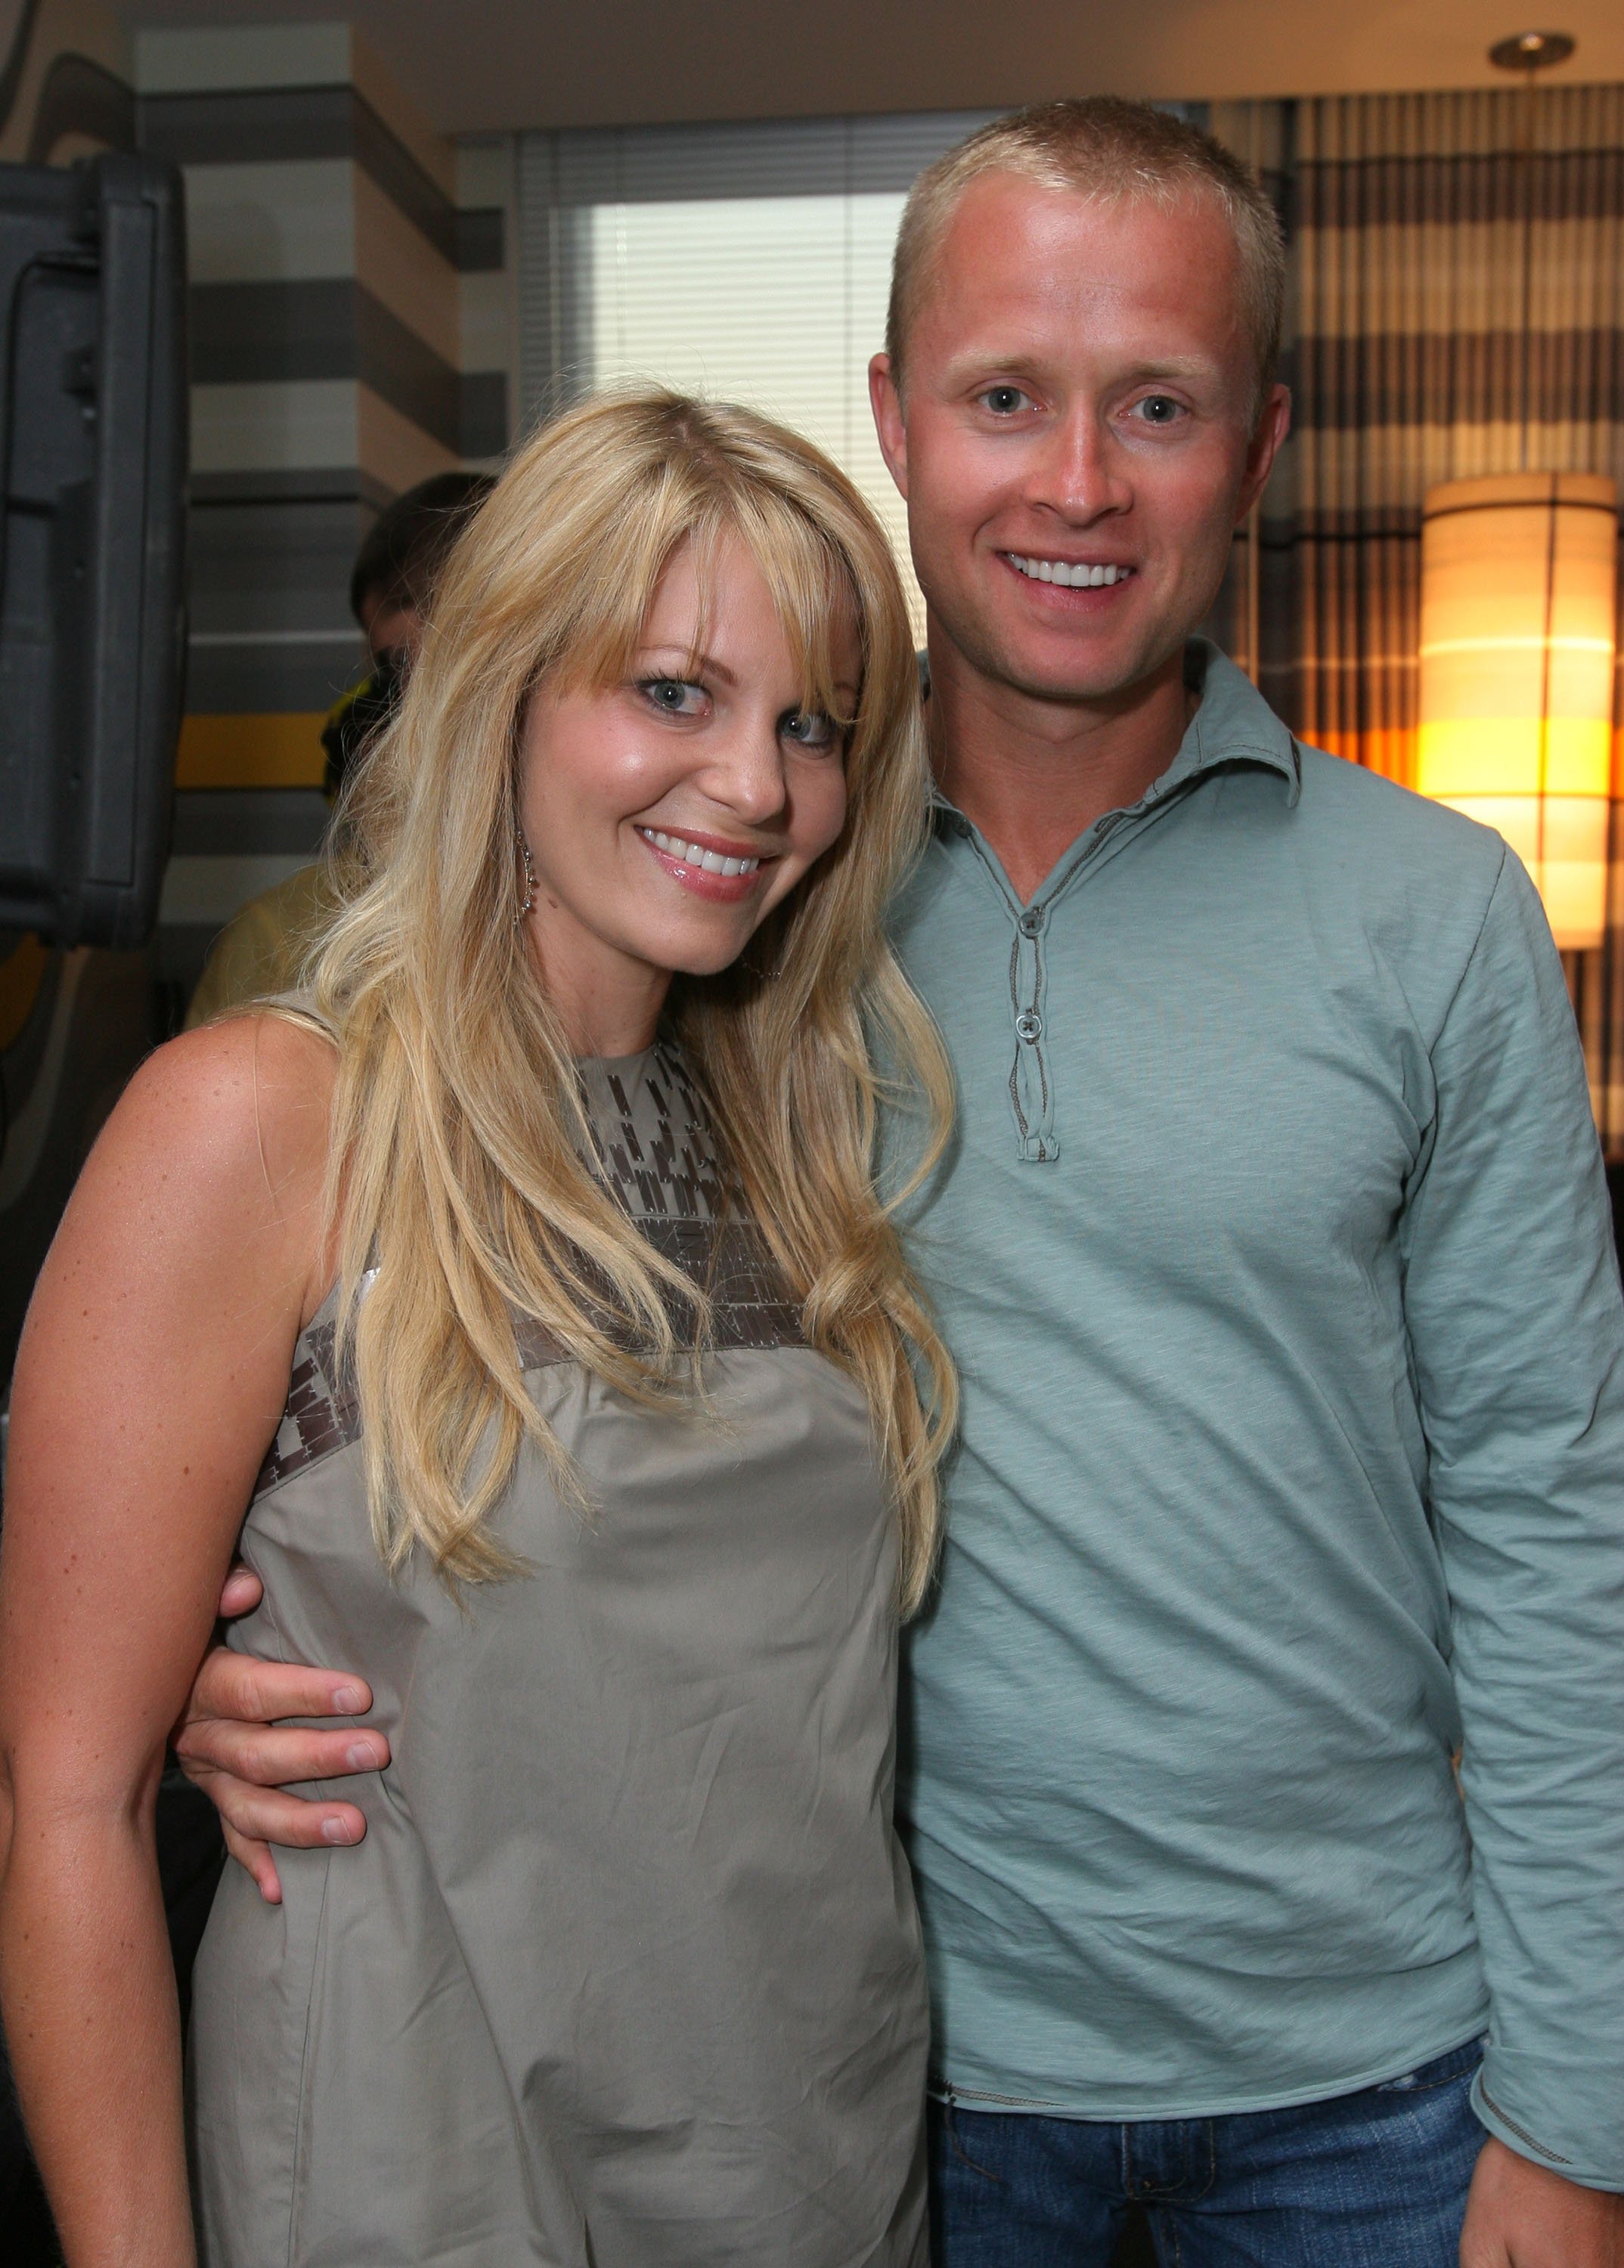 Candace Cameron Bure and Husband Valeri Bure at The ESPN The Magazine ESPY Style Studio held at The Standard Hotel on July 15, 2008 in Los Angeles, California. | Source: Getty Images